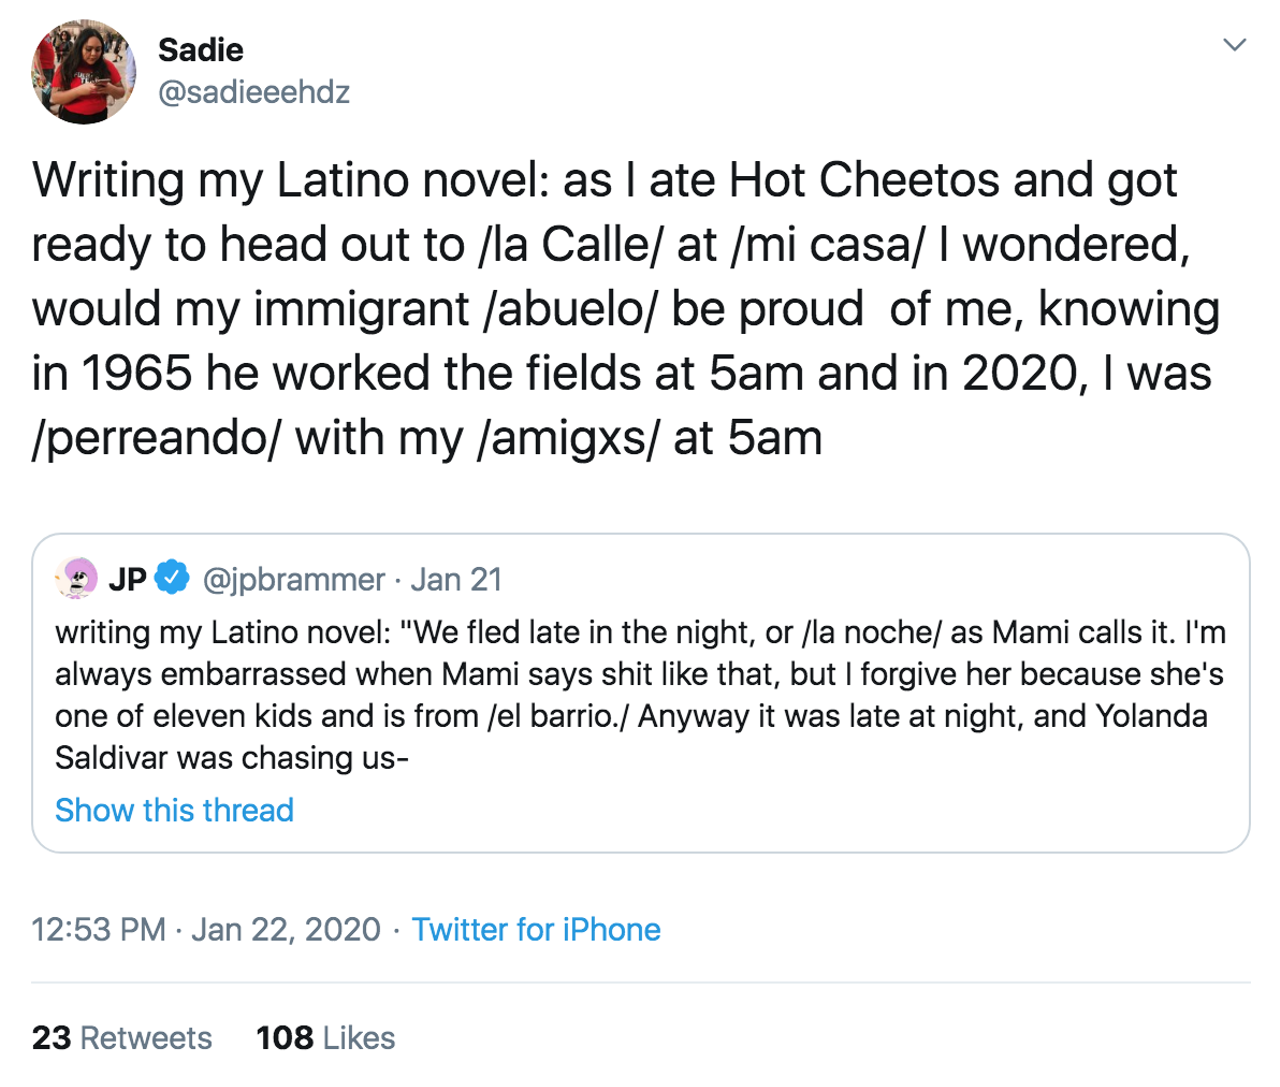 Twitter is Calling Out Jeanine Cummins' American Dirt with Painfully Hilarious 'Writing My Latino Novel' Tweets